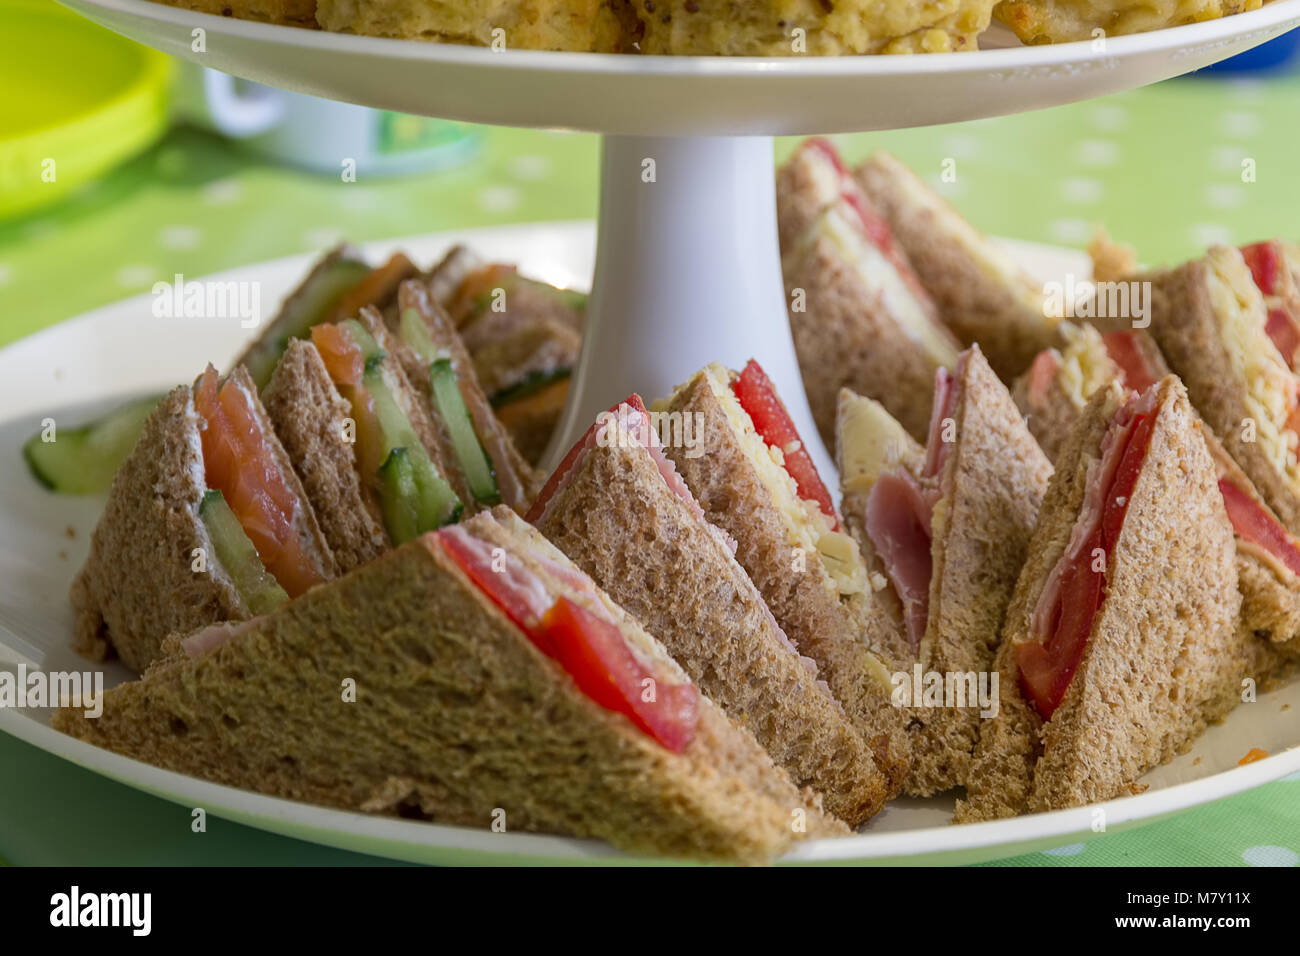 English afternoon tea consisting of a variety of sandwiches on a tiered cake stand Stock Photo